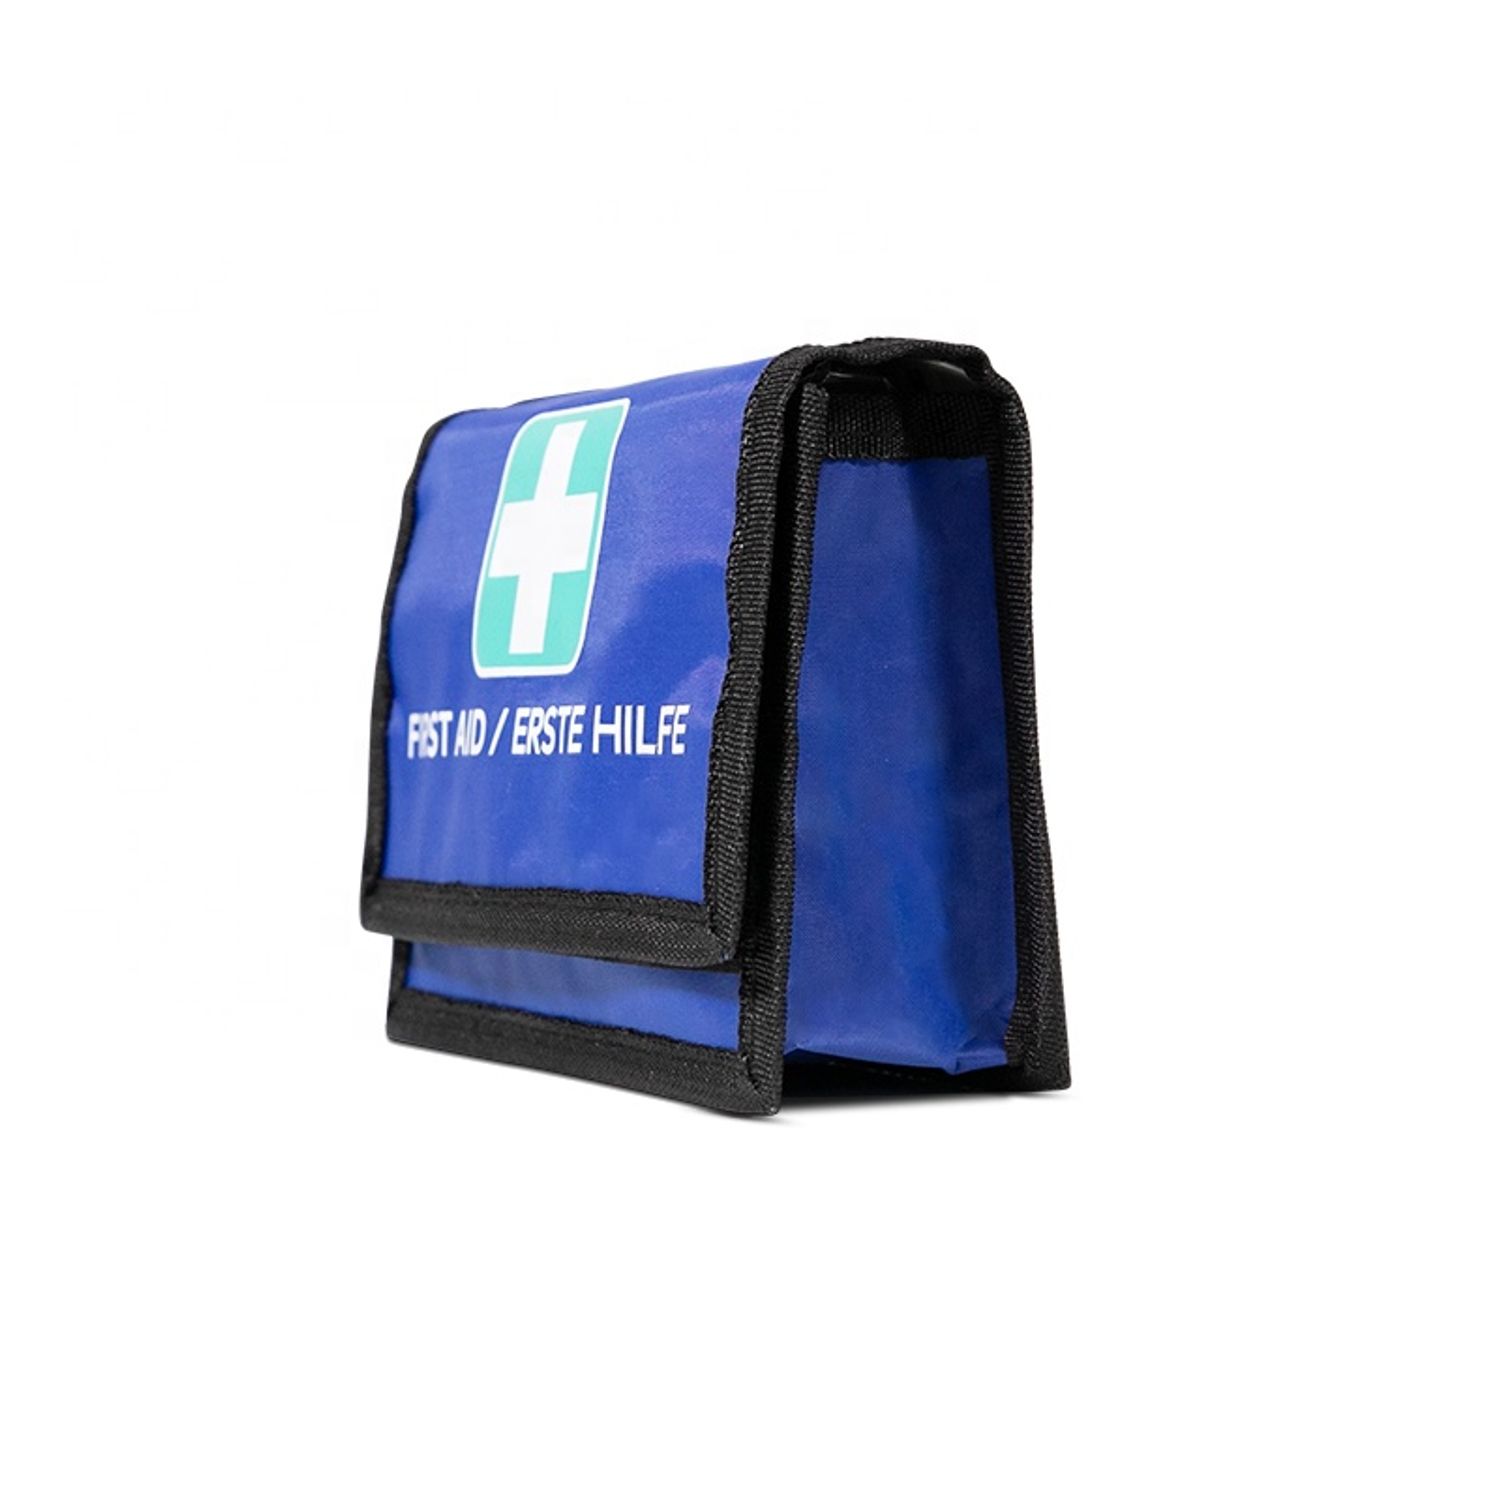 show of Pocket-Sized First Aid Kit for Emergencies at Home or Outdoors